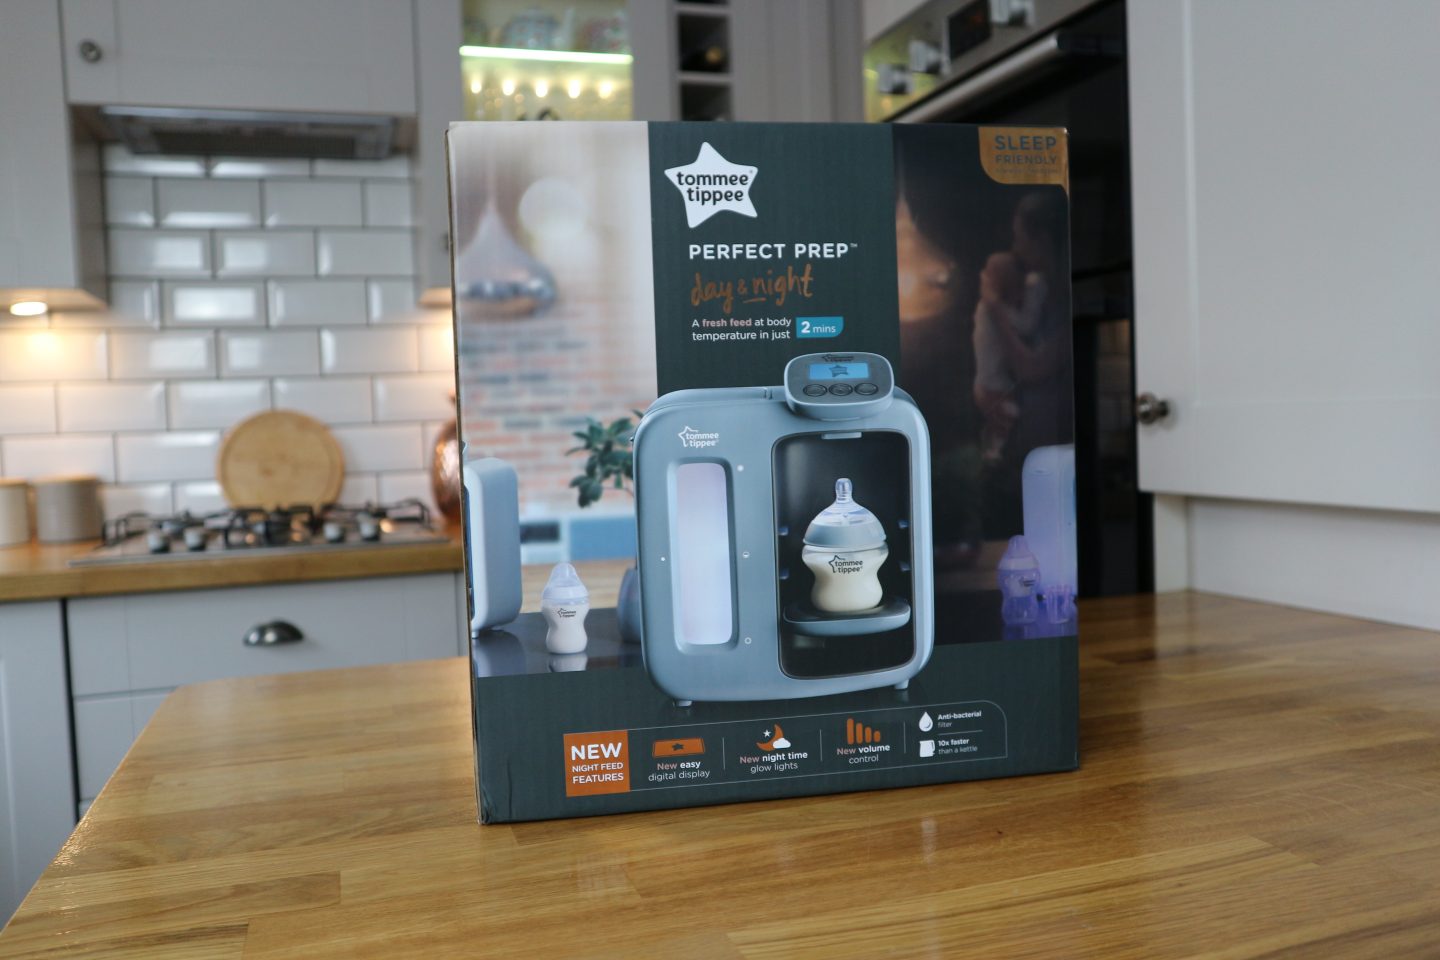 cleaning tommee tippee perfect prep day and night